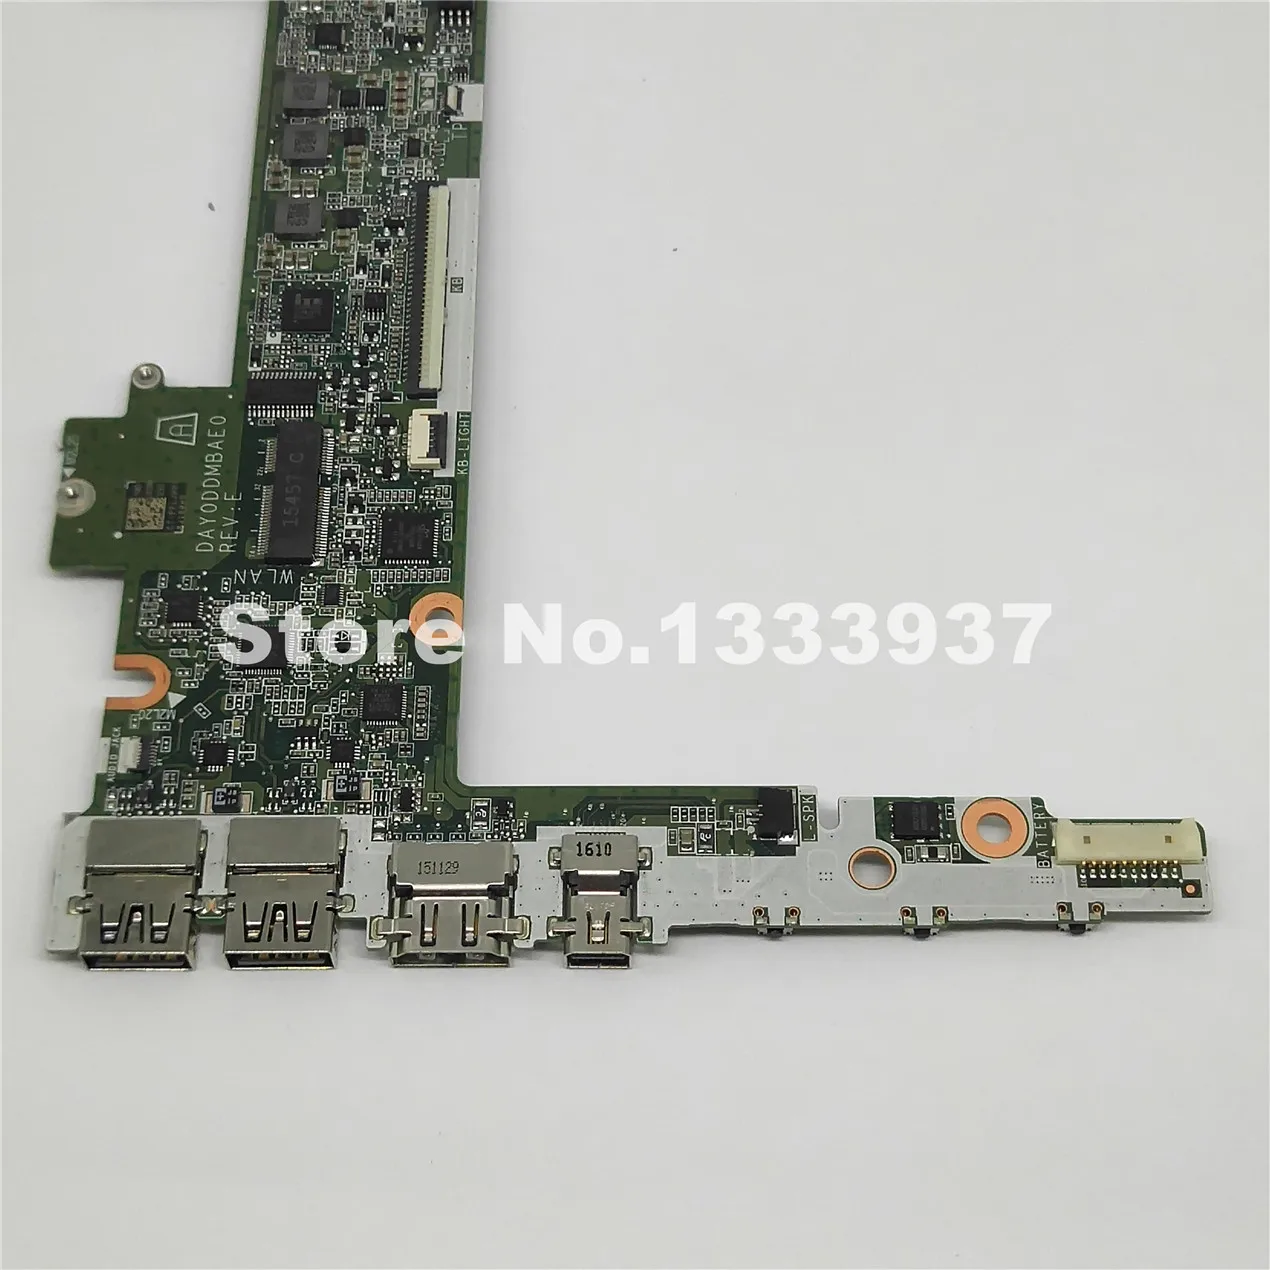 

849425-601 DAY0DDMBAE0 for HP Spectre x360 G2 13-4102TU 13-4000 laptop motherboard SR2EZ I7-6500 849425-001 849425-501 mainboard